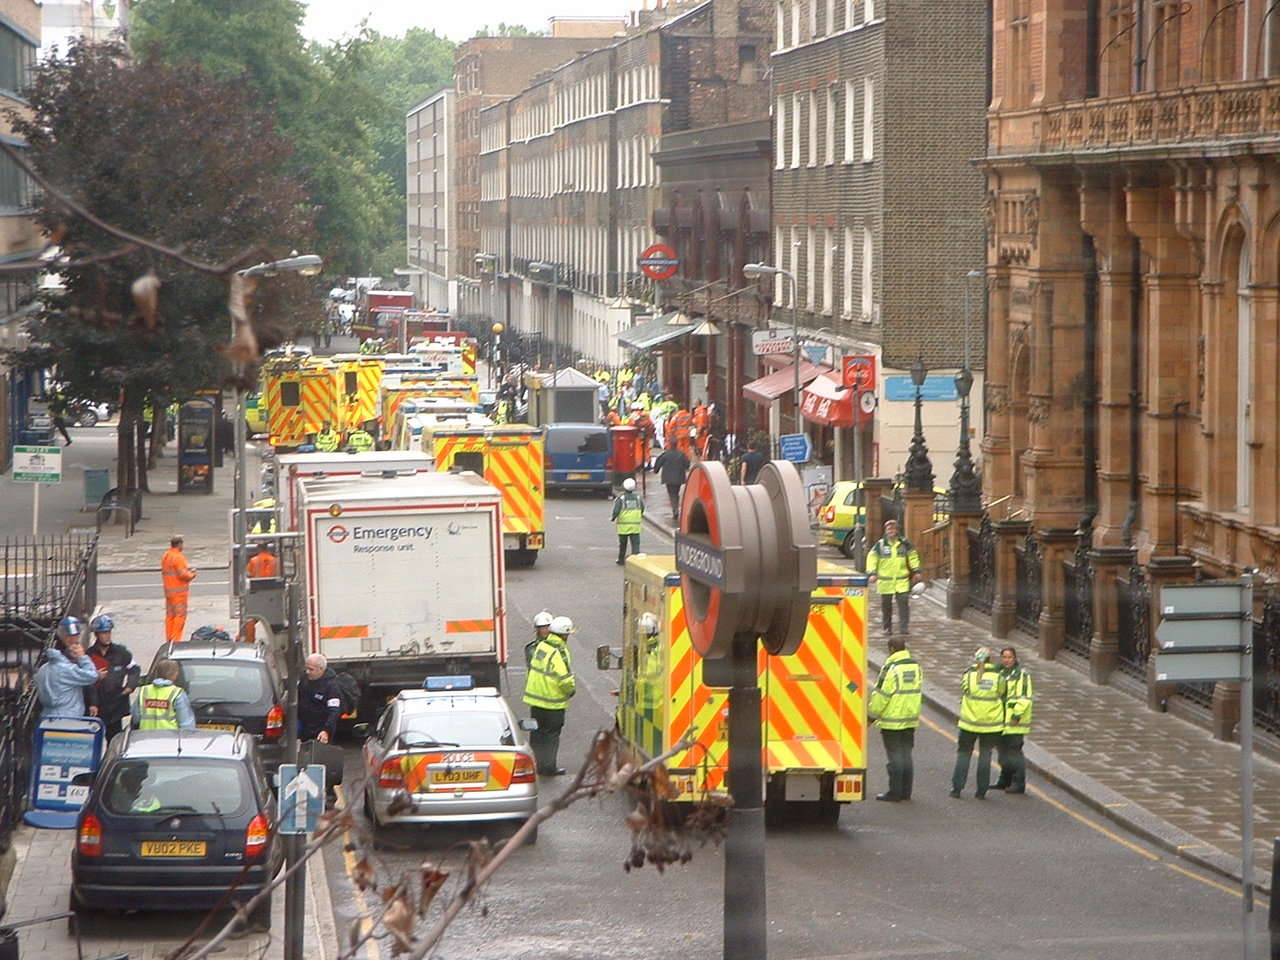 1280px-Russell_square_ambulances